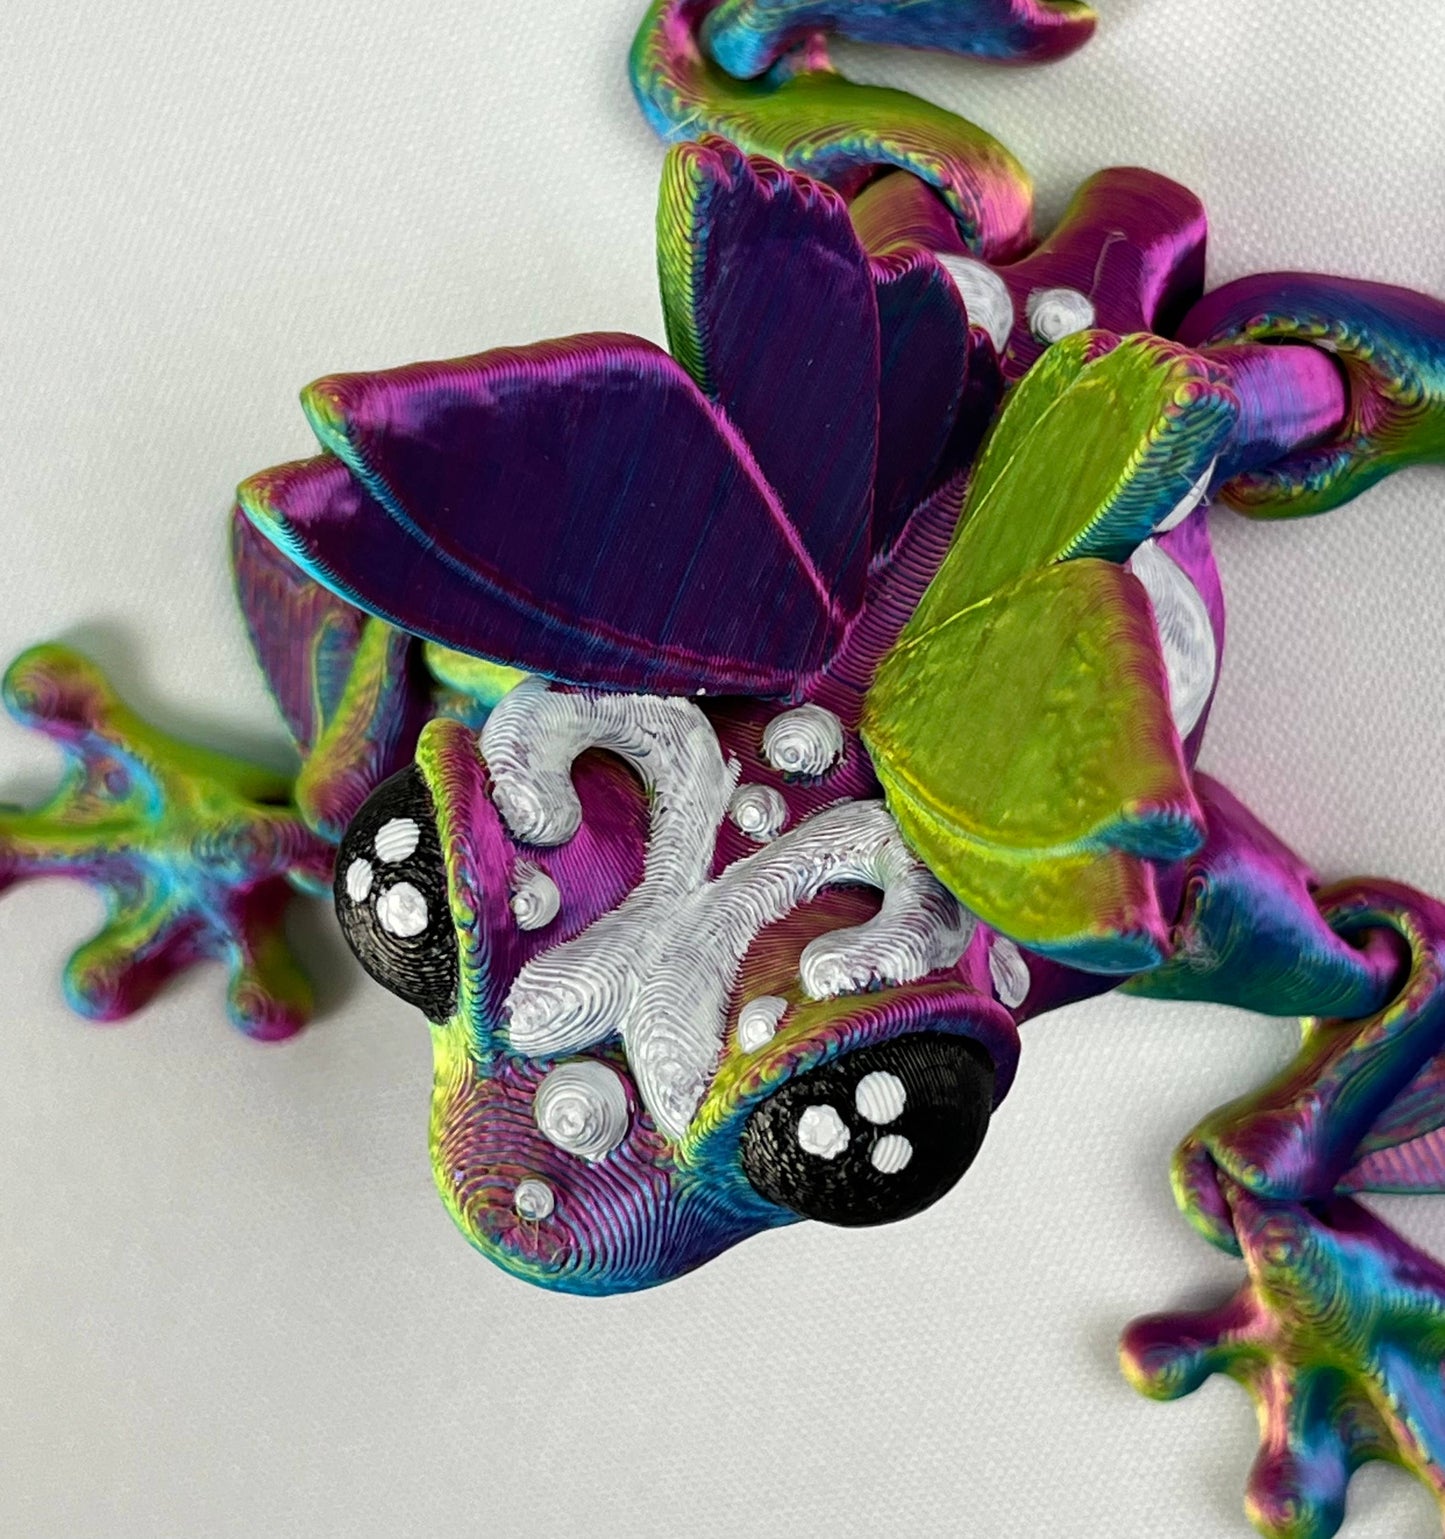 3D printed butterfly frog